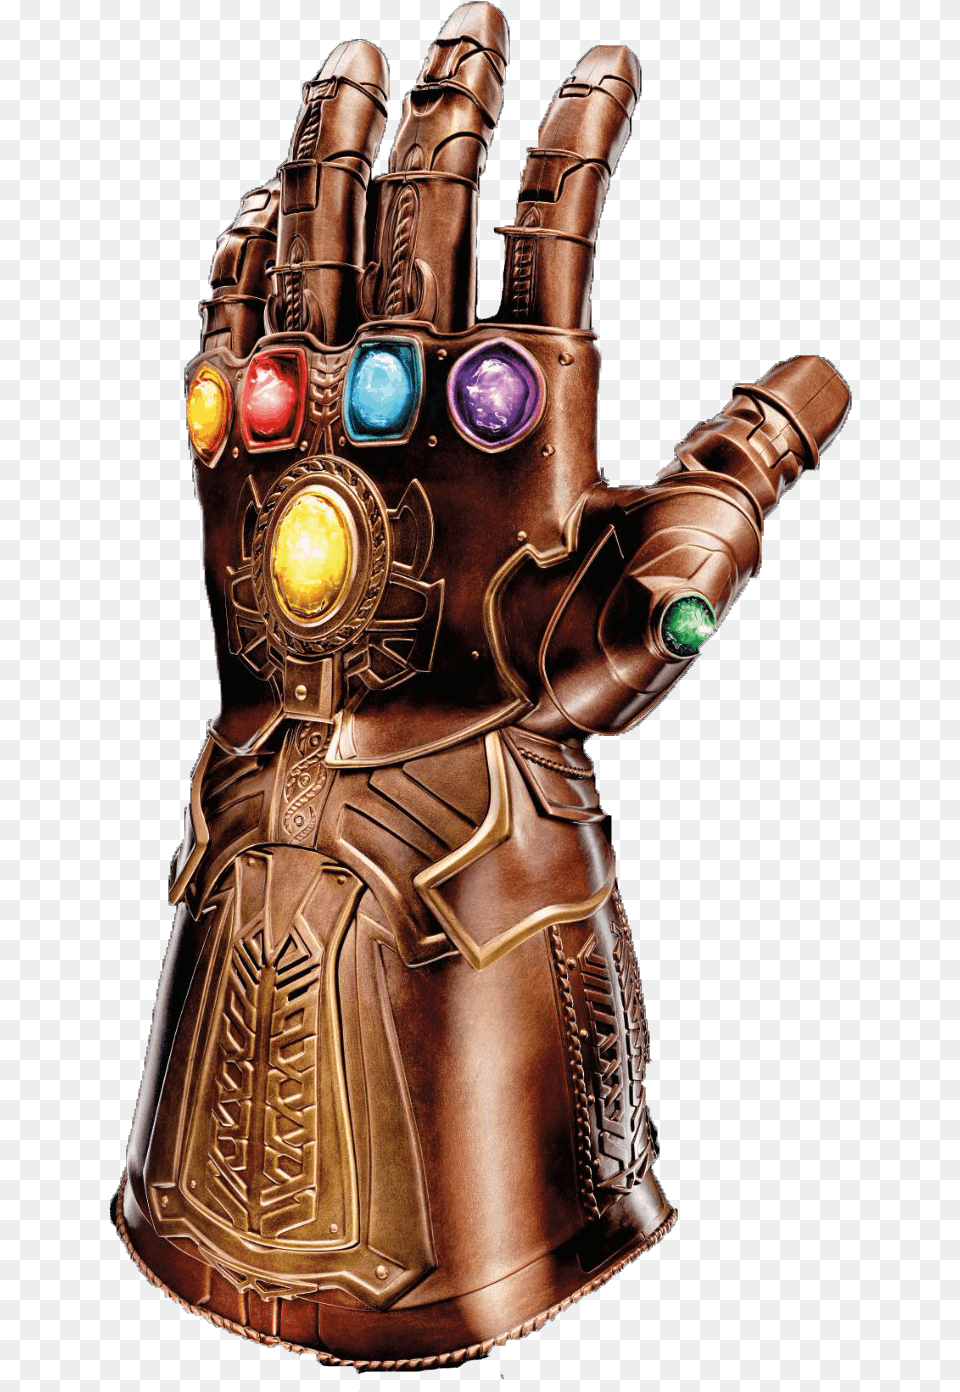 Thanos Glove For Infinity Gauntlet Transparent Background, Clothing, Bronze, Adult, Person Png